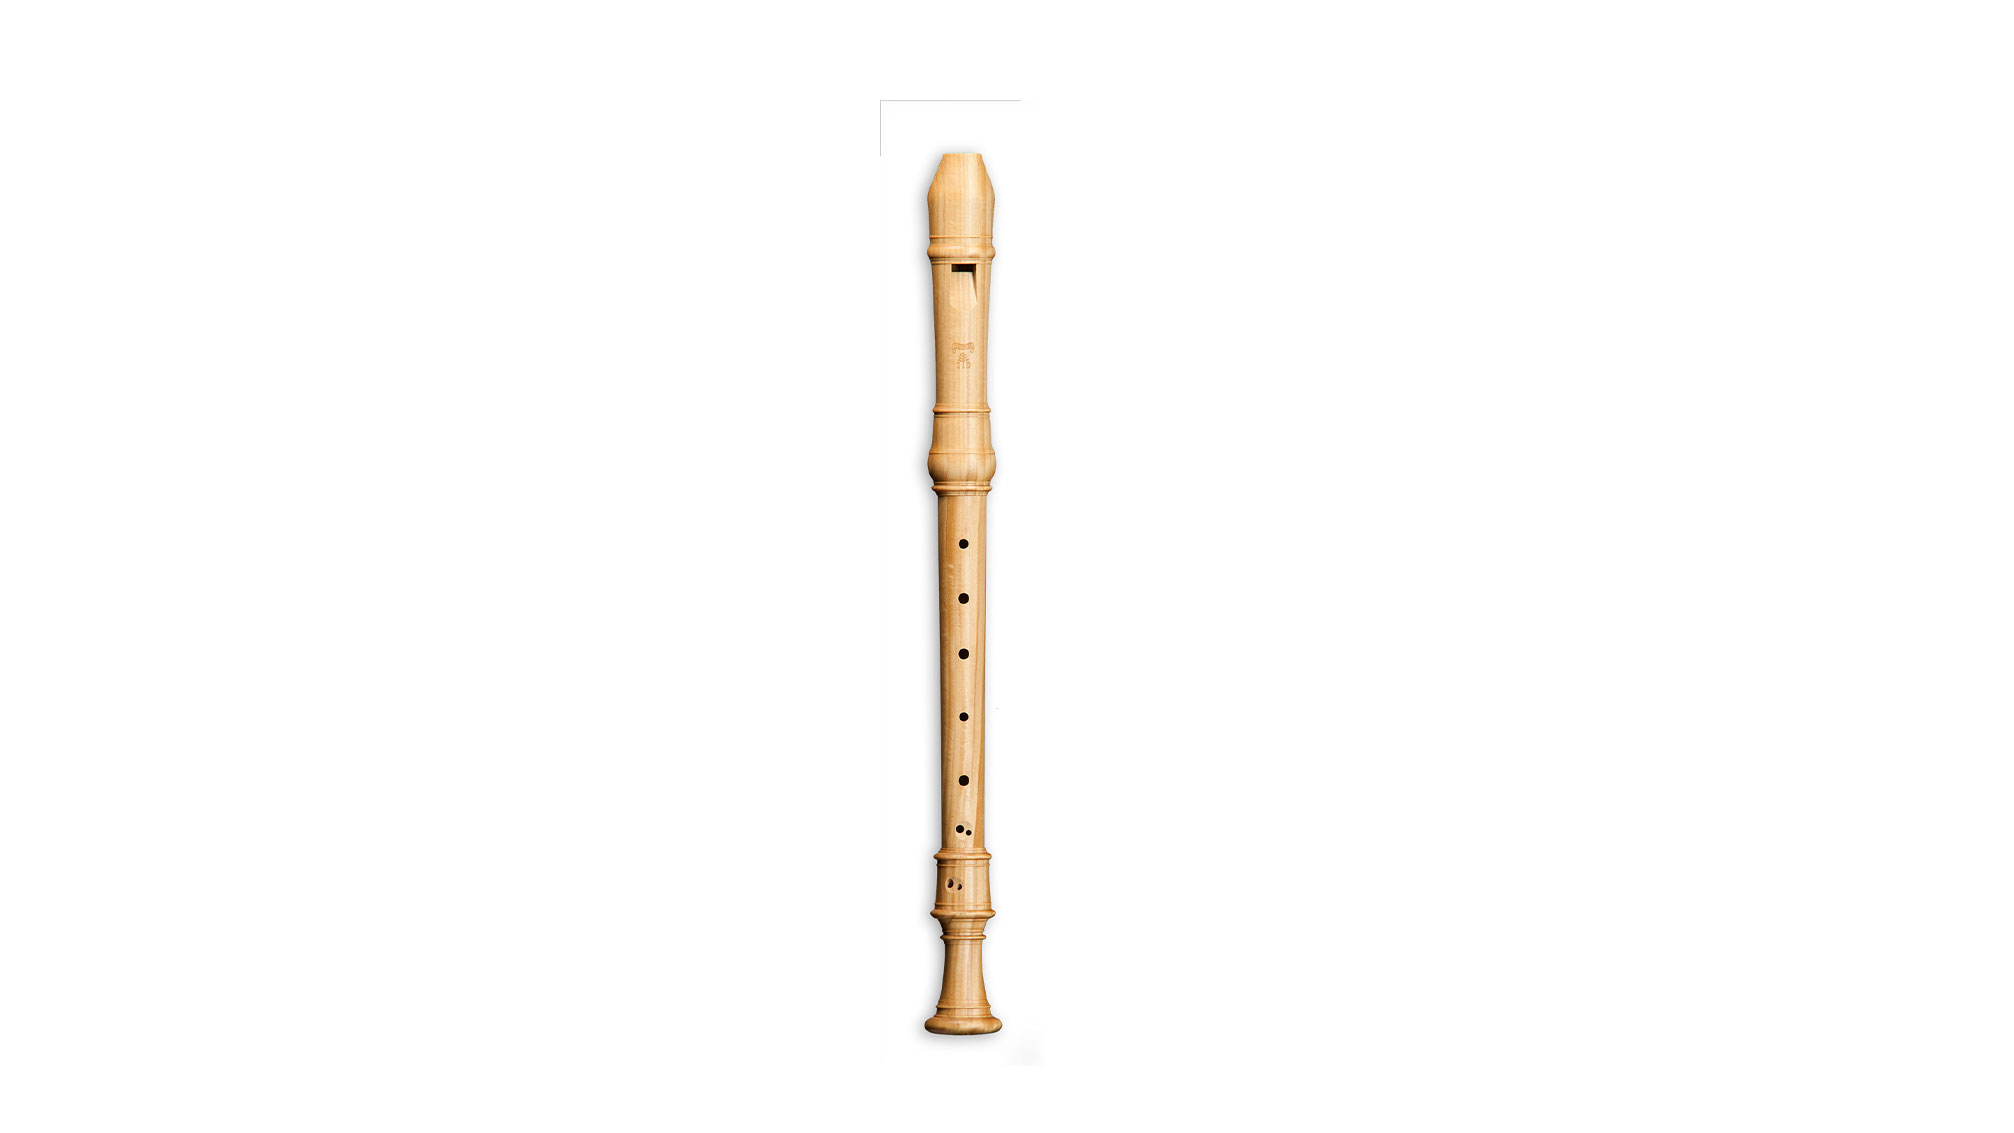 Mollenhauer, "Denner-Edition", alto in f', baroque double hole, 442 Hz, after Jacob Denner, Satinwoo